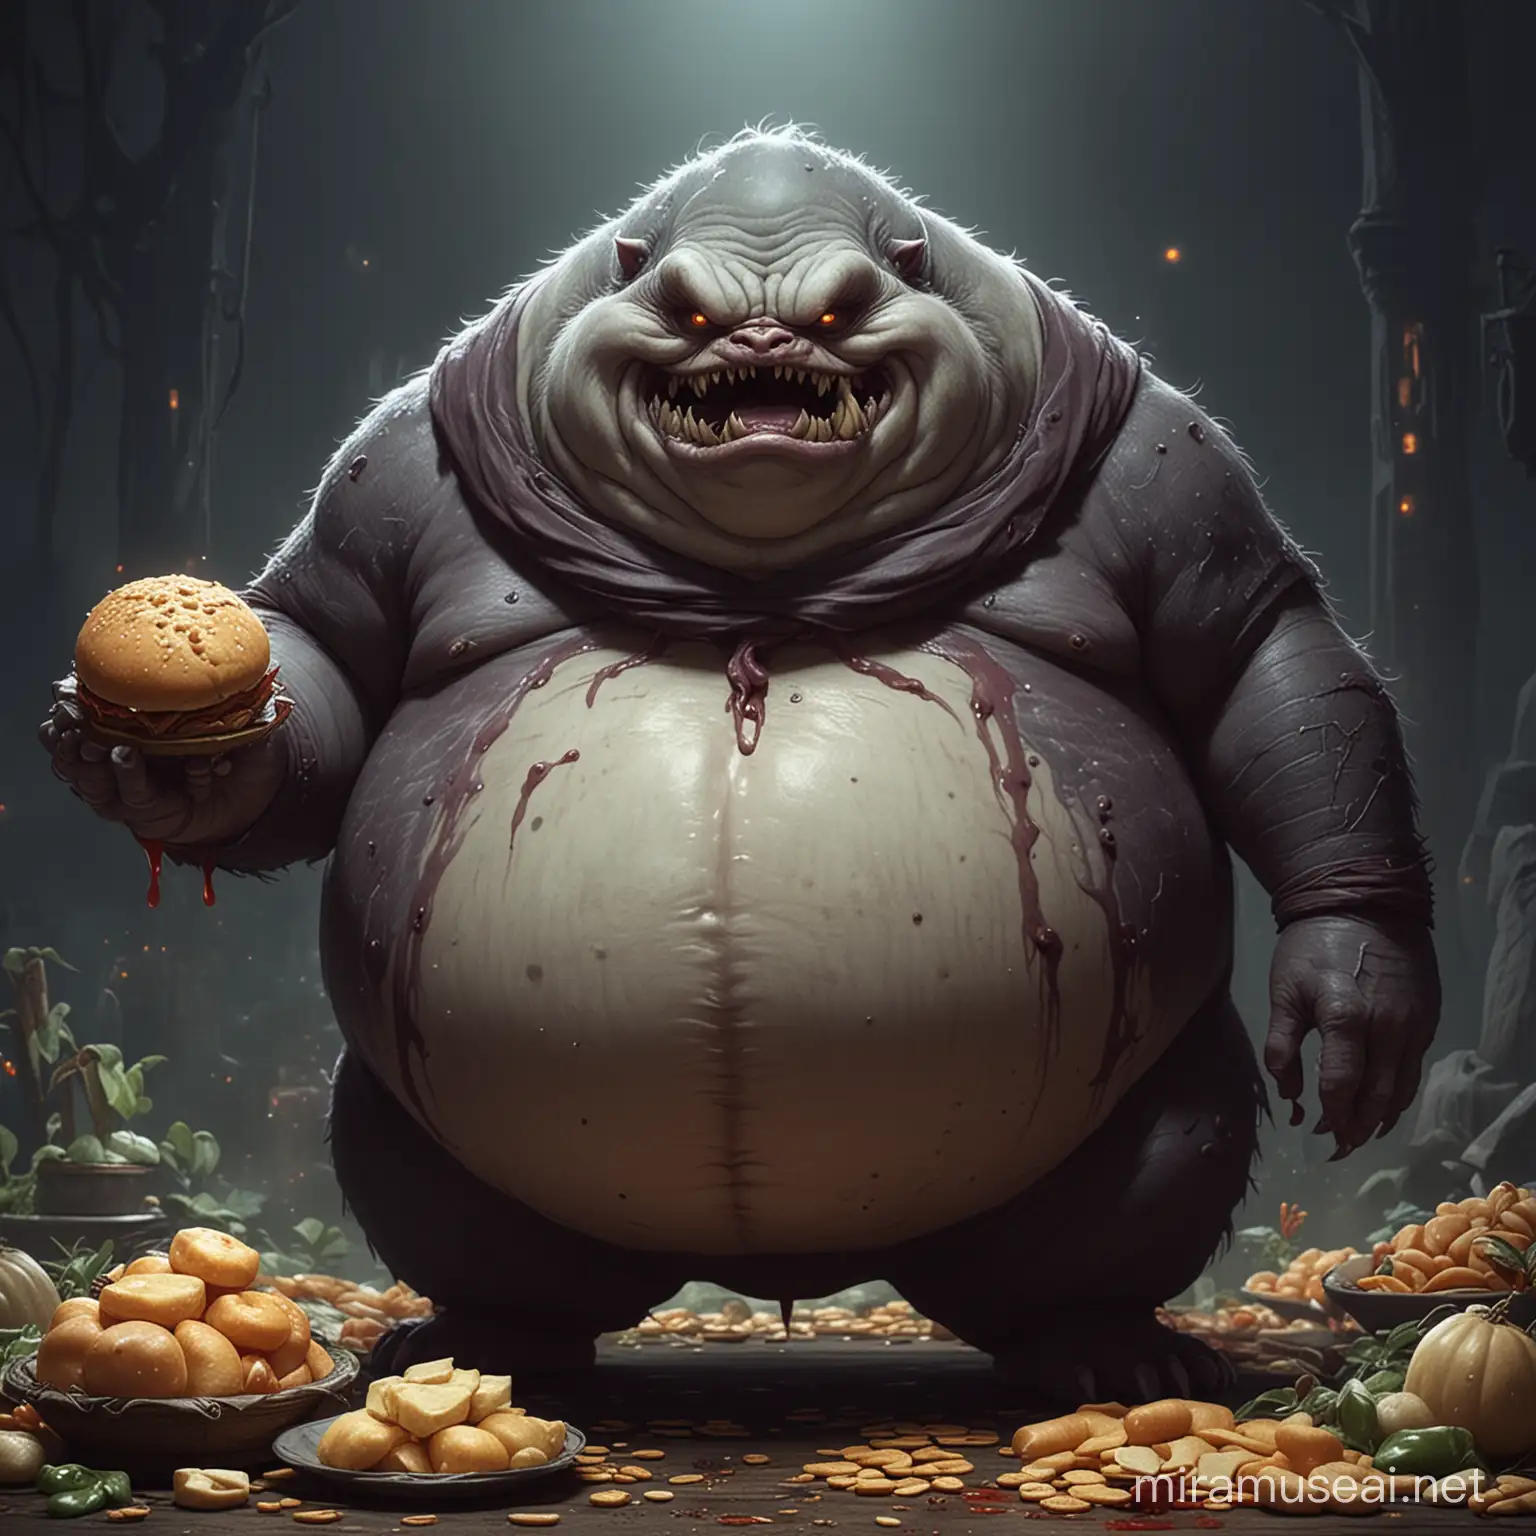 An anime style evil fat creature related to the control of hunger and food, from a fantasy tale.